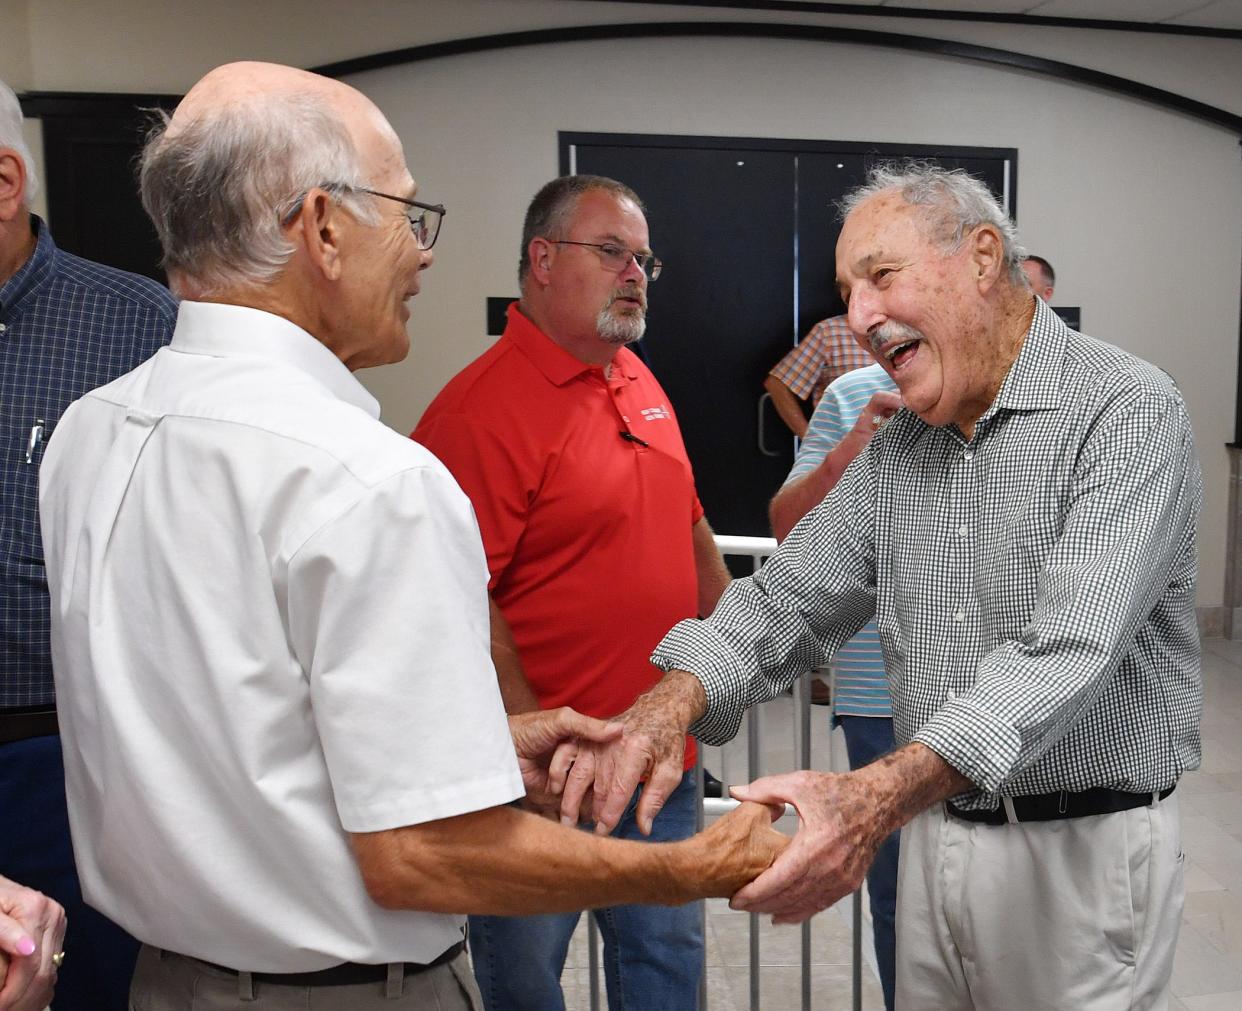 Former Wichita County Judge Nick Gipson, left, congratulates Willie Wall on his retirement after 40 years as administrative assistant to county judges.